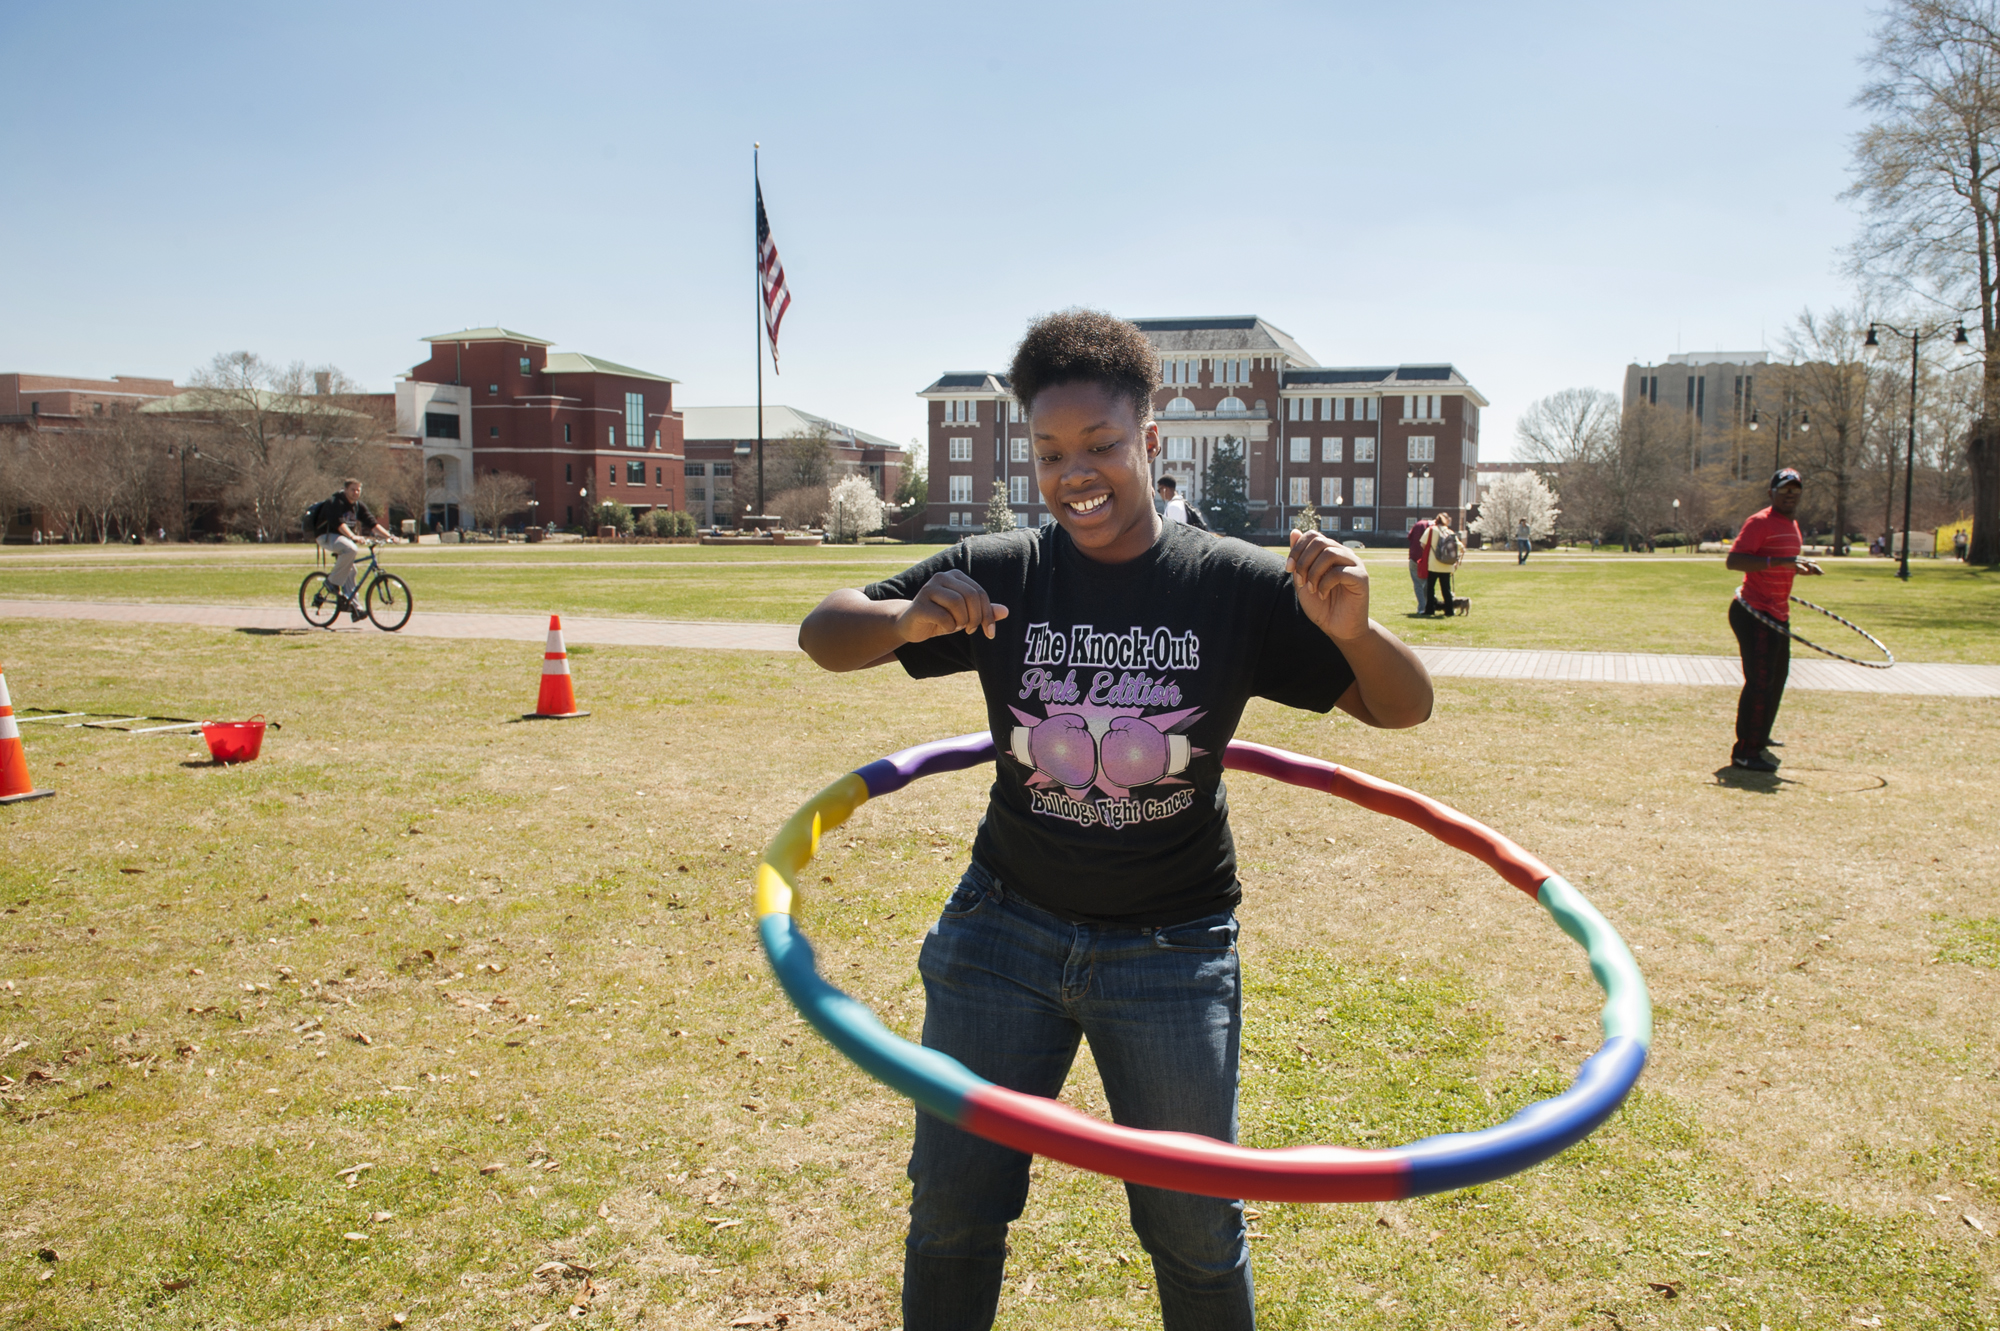 Chelsi Hosey, a freshman business major from Heidelberg, set the day's hula hooping record at the recent March into Spring event sponsored by health education and wellness.